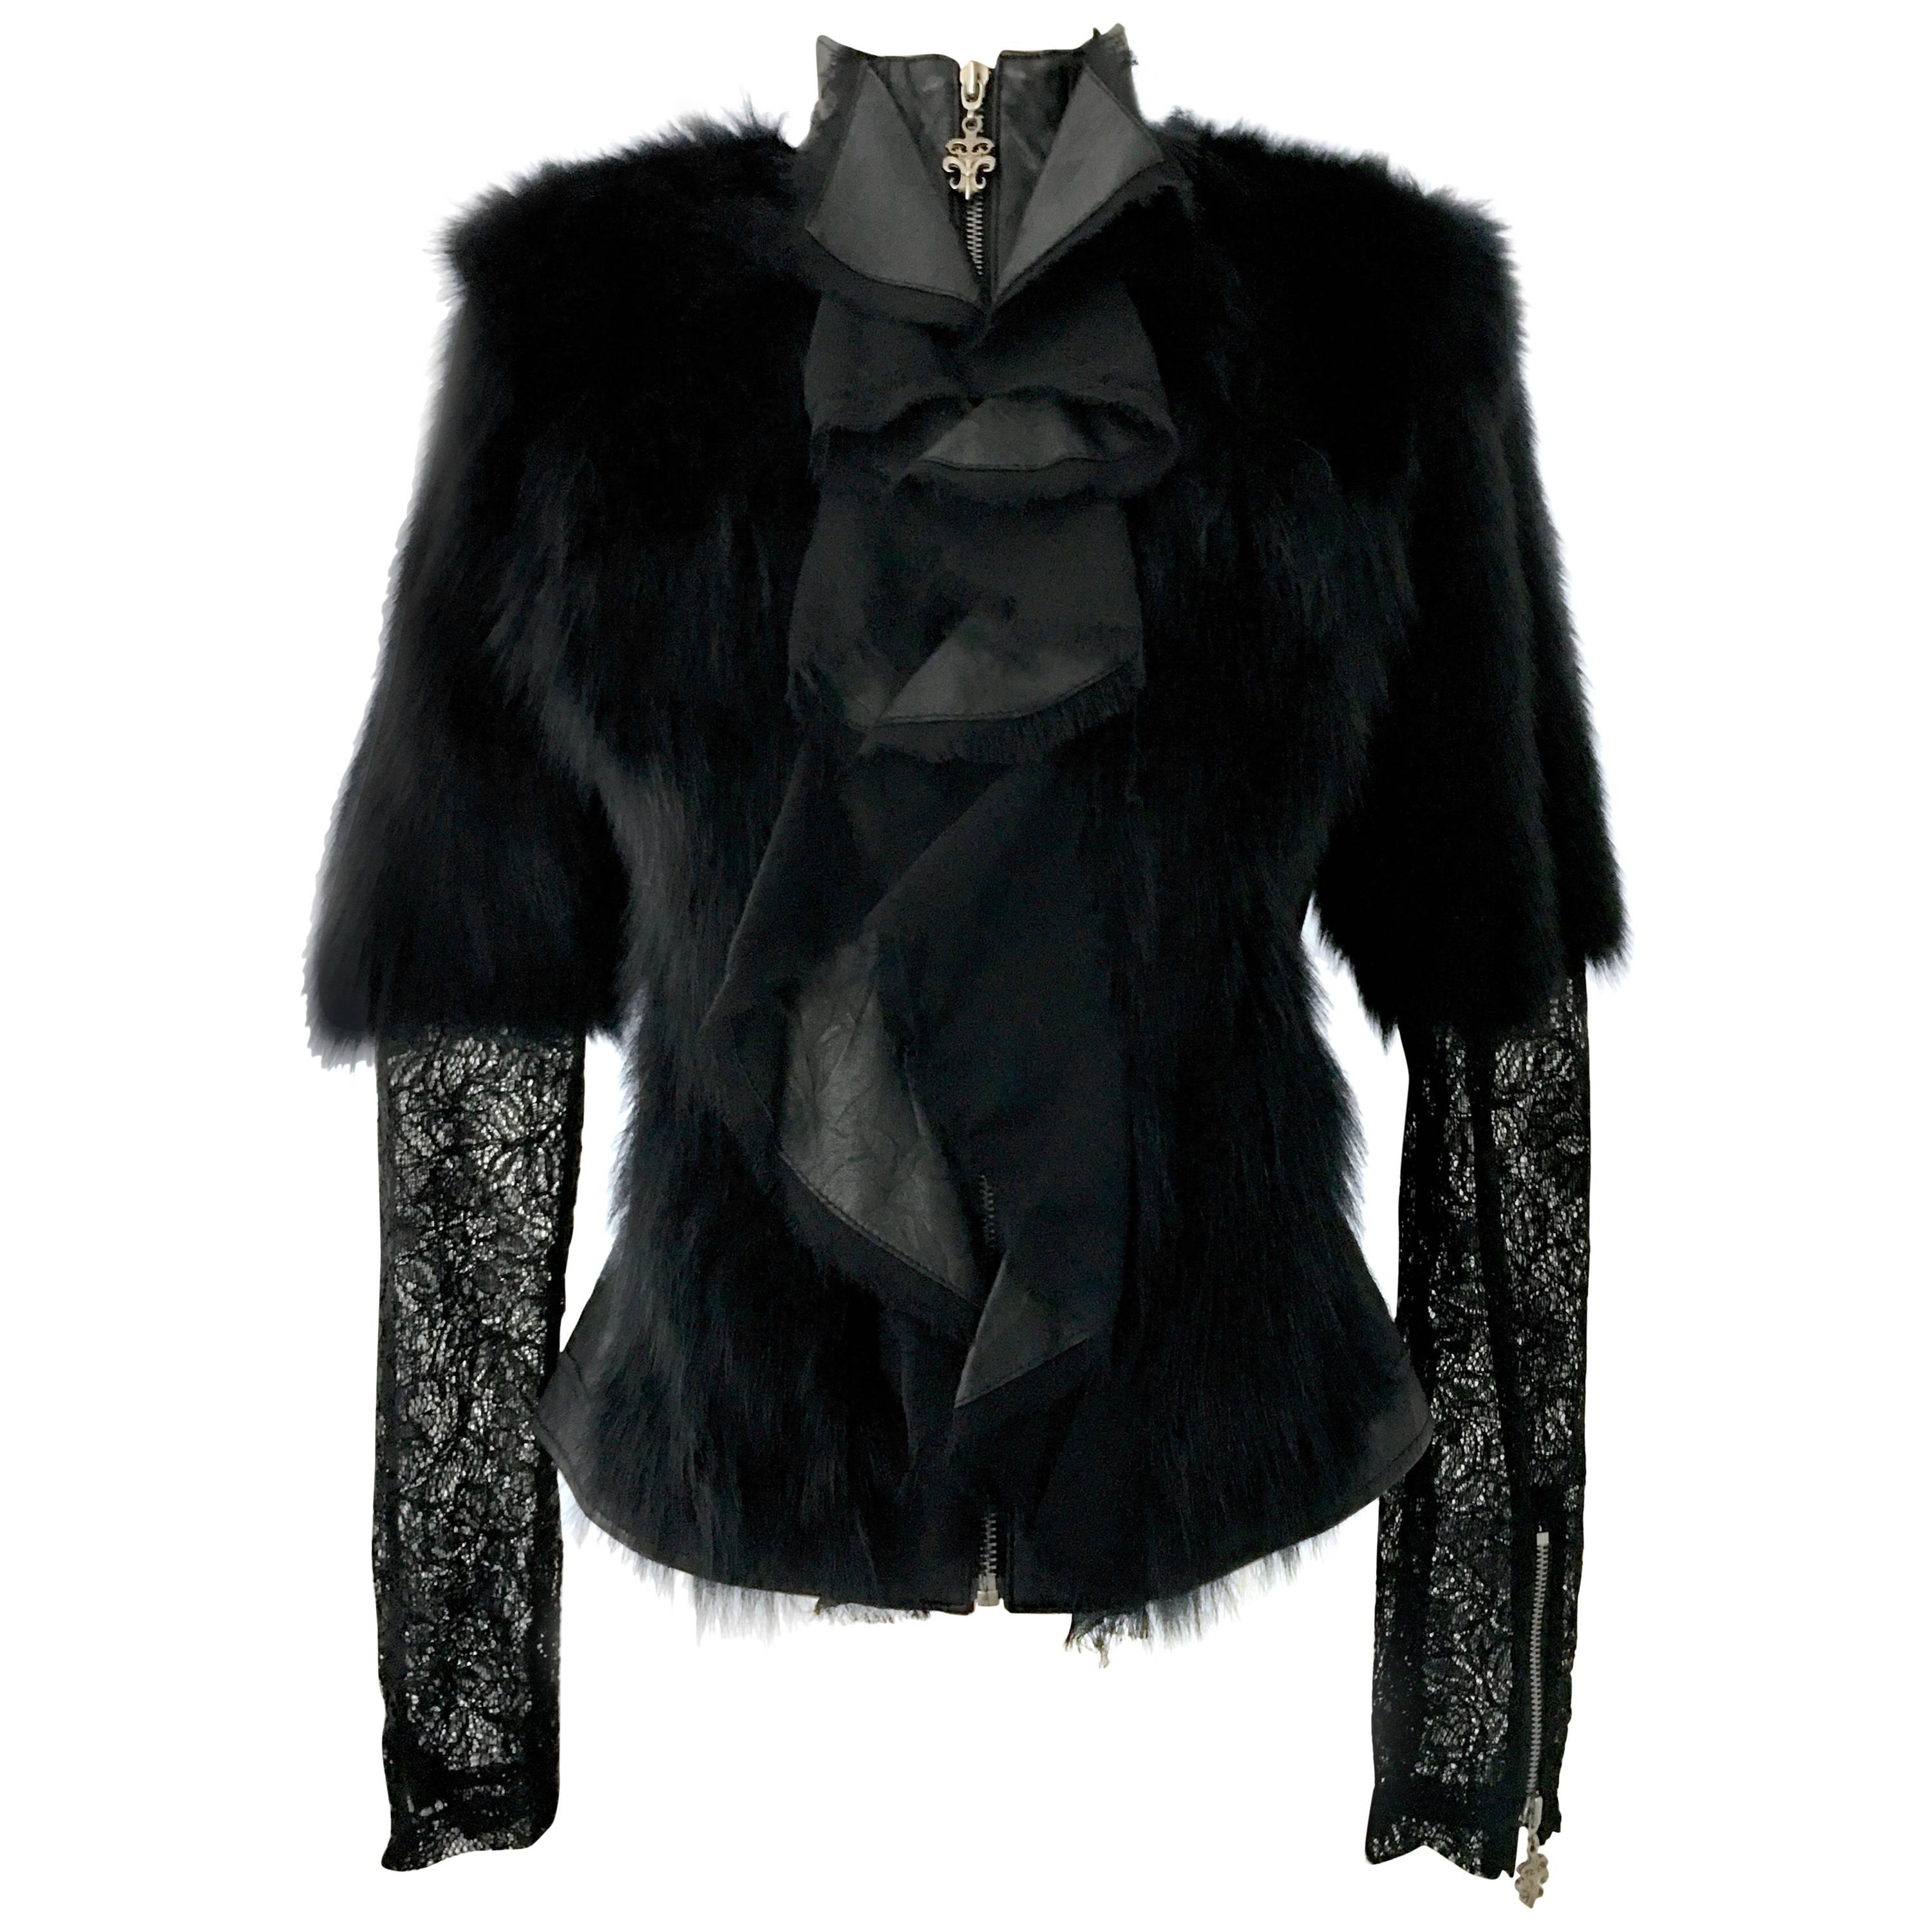 21st Century & New, Coveted Black Leather, Authentic Fox Fur & Lace shirt/jacket by, Royal Underground - Nikki Six & Kelley Gray. Features a fitted zipper front bodice in black soft leather with black fox fur trim and black lace panels and sleeves.